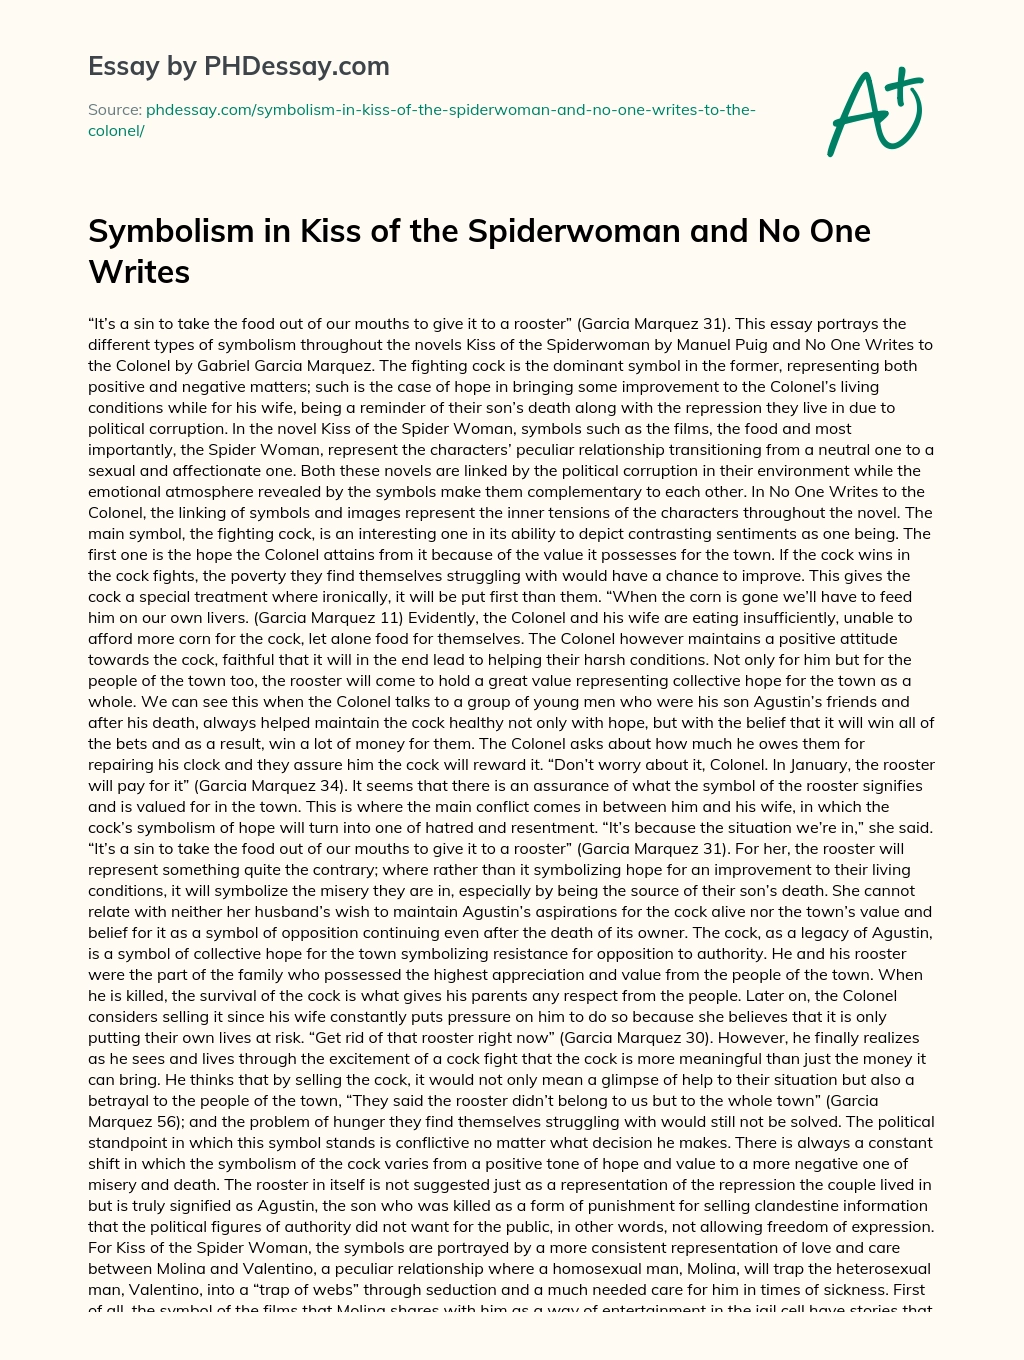 Symbolism in Kiss of the Spiderwoman and No One Writes essay